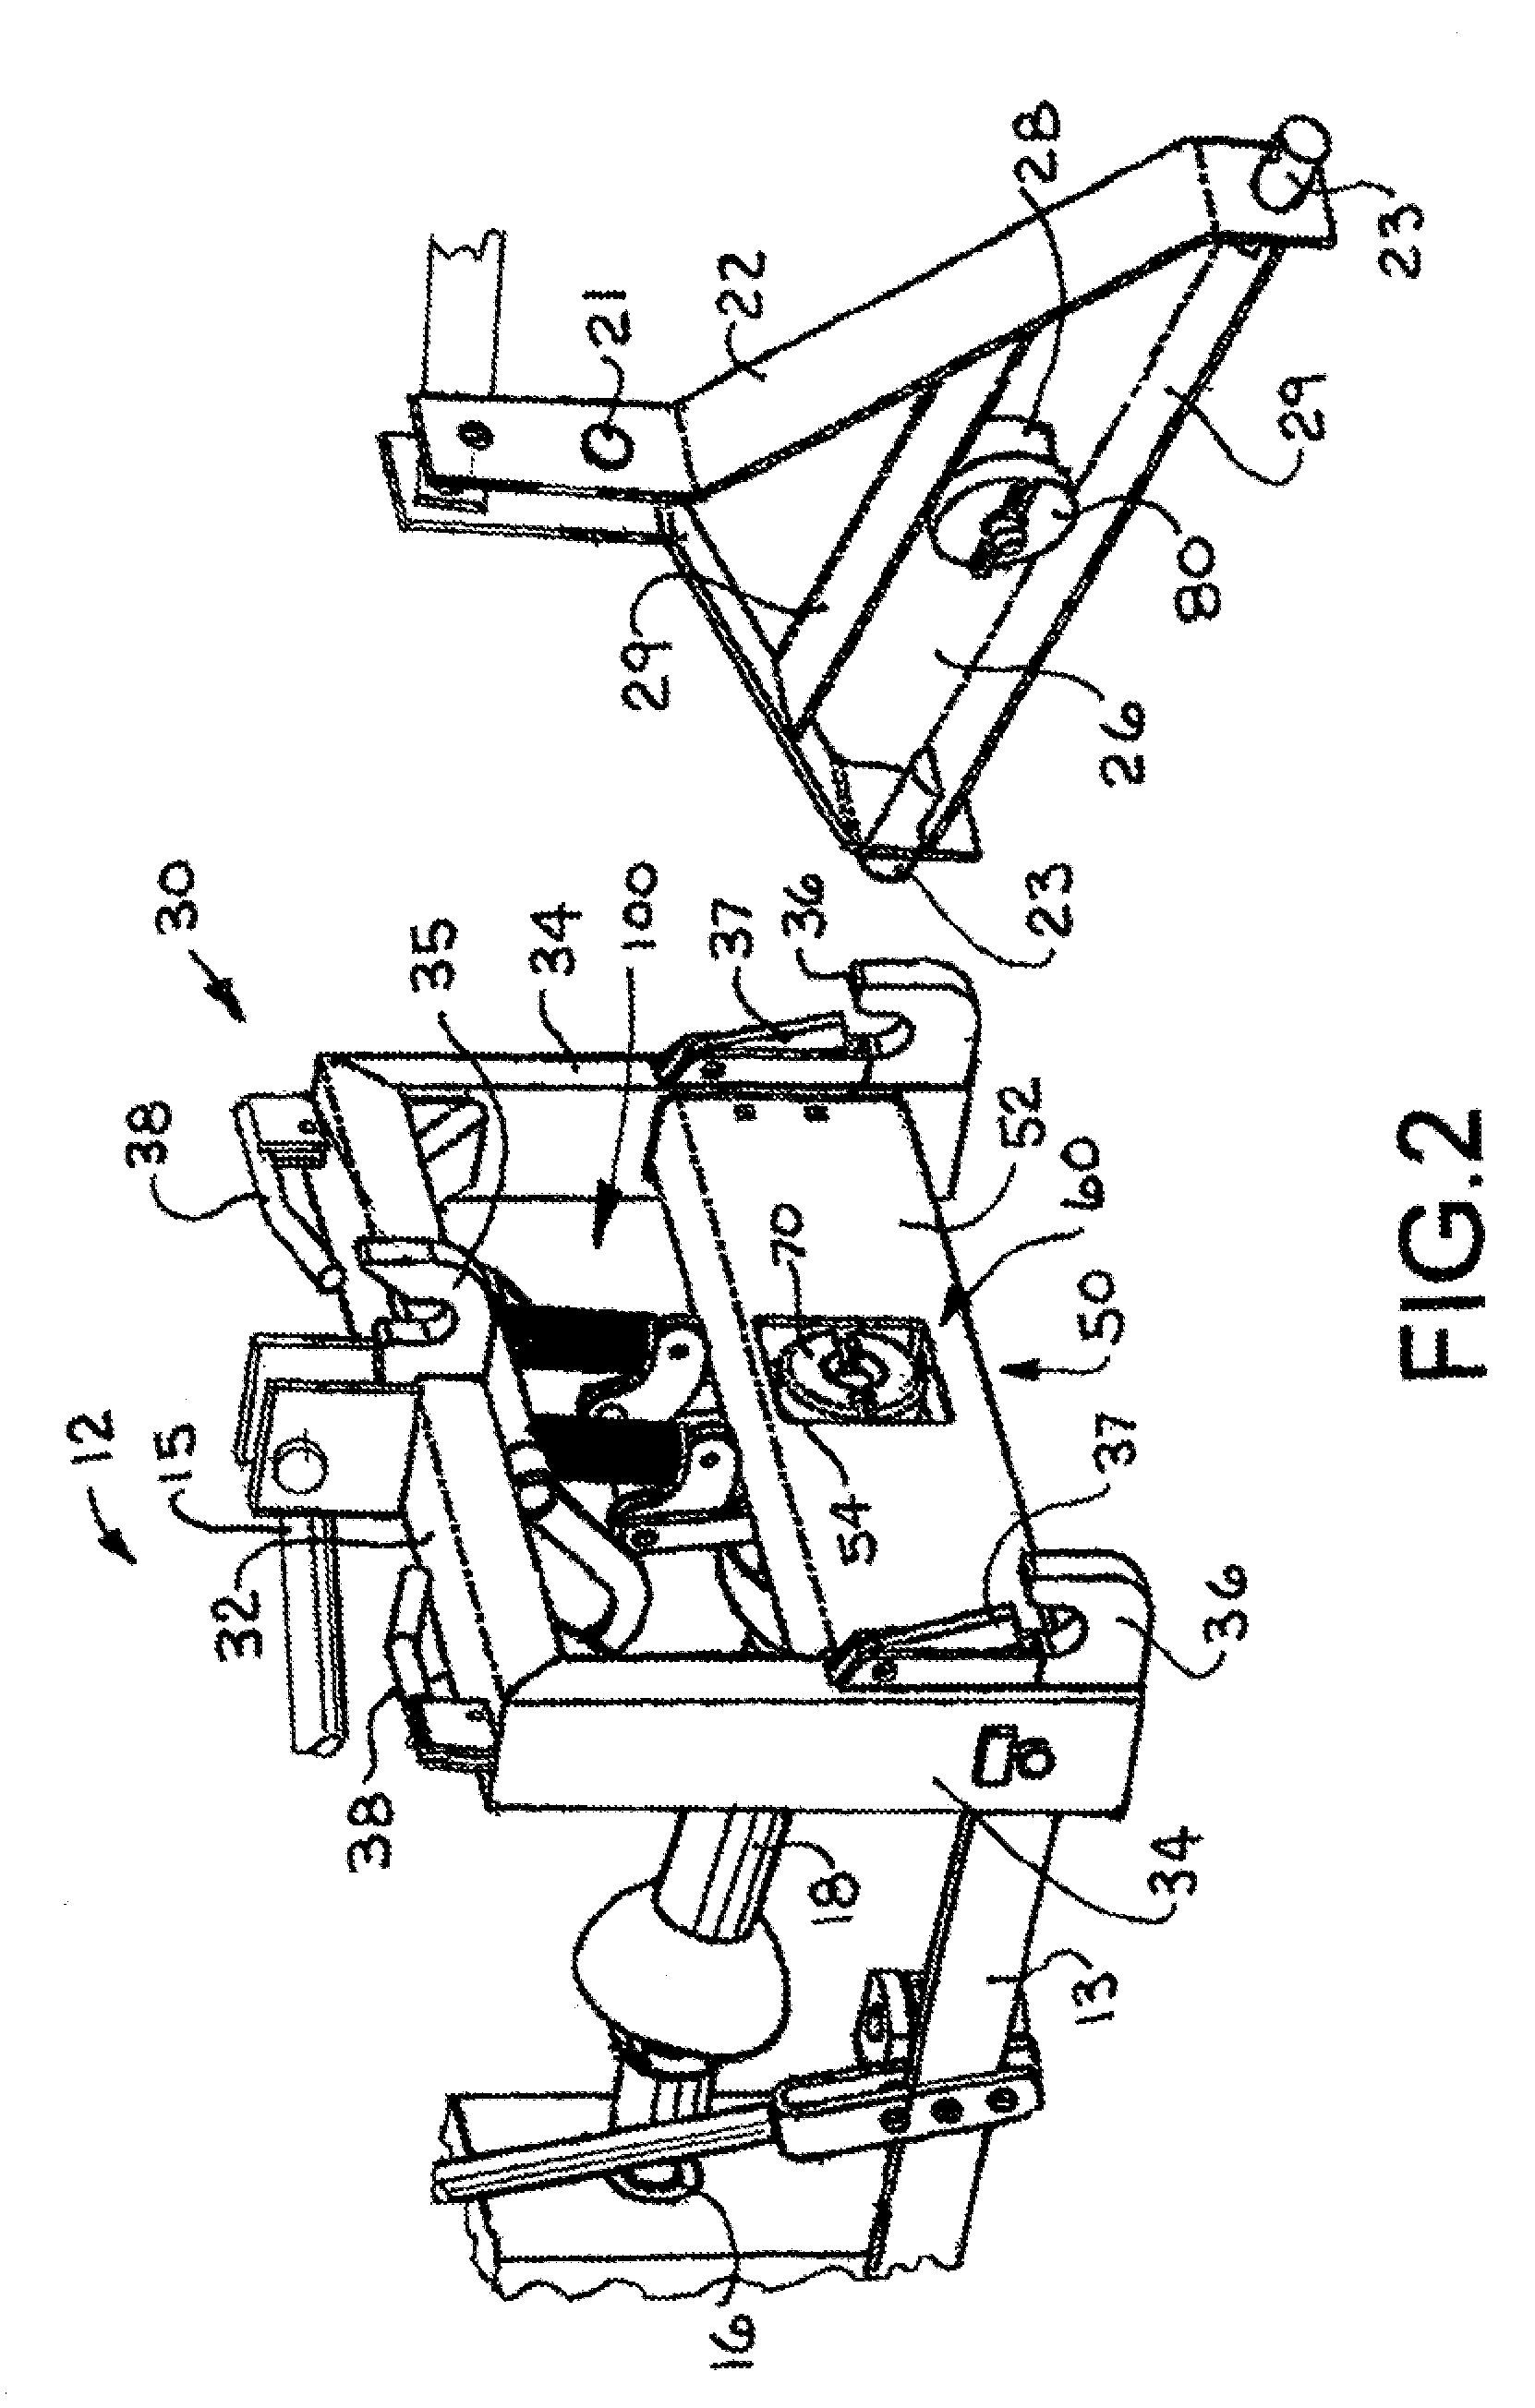 Lever connect PTO module for three-point hitch quick coupler